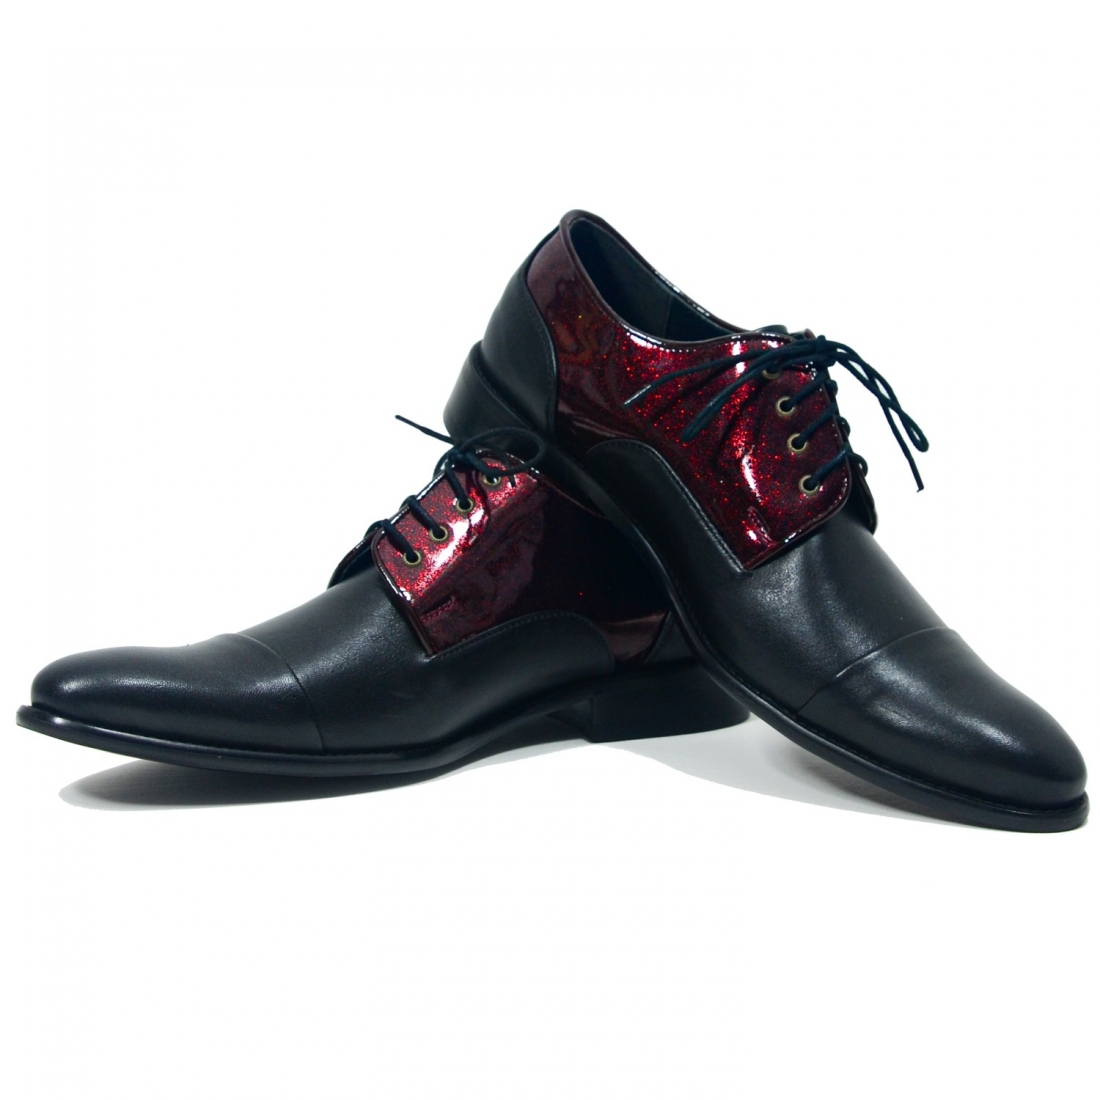 Modello Chuvry - Classic Shoes - Handmade Colorful Italian Leather Shoes